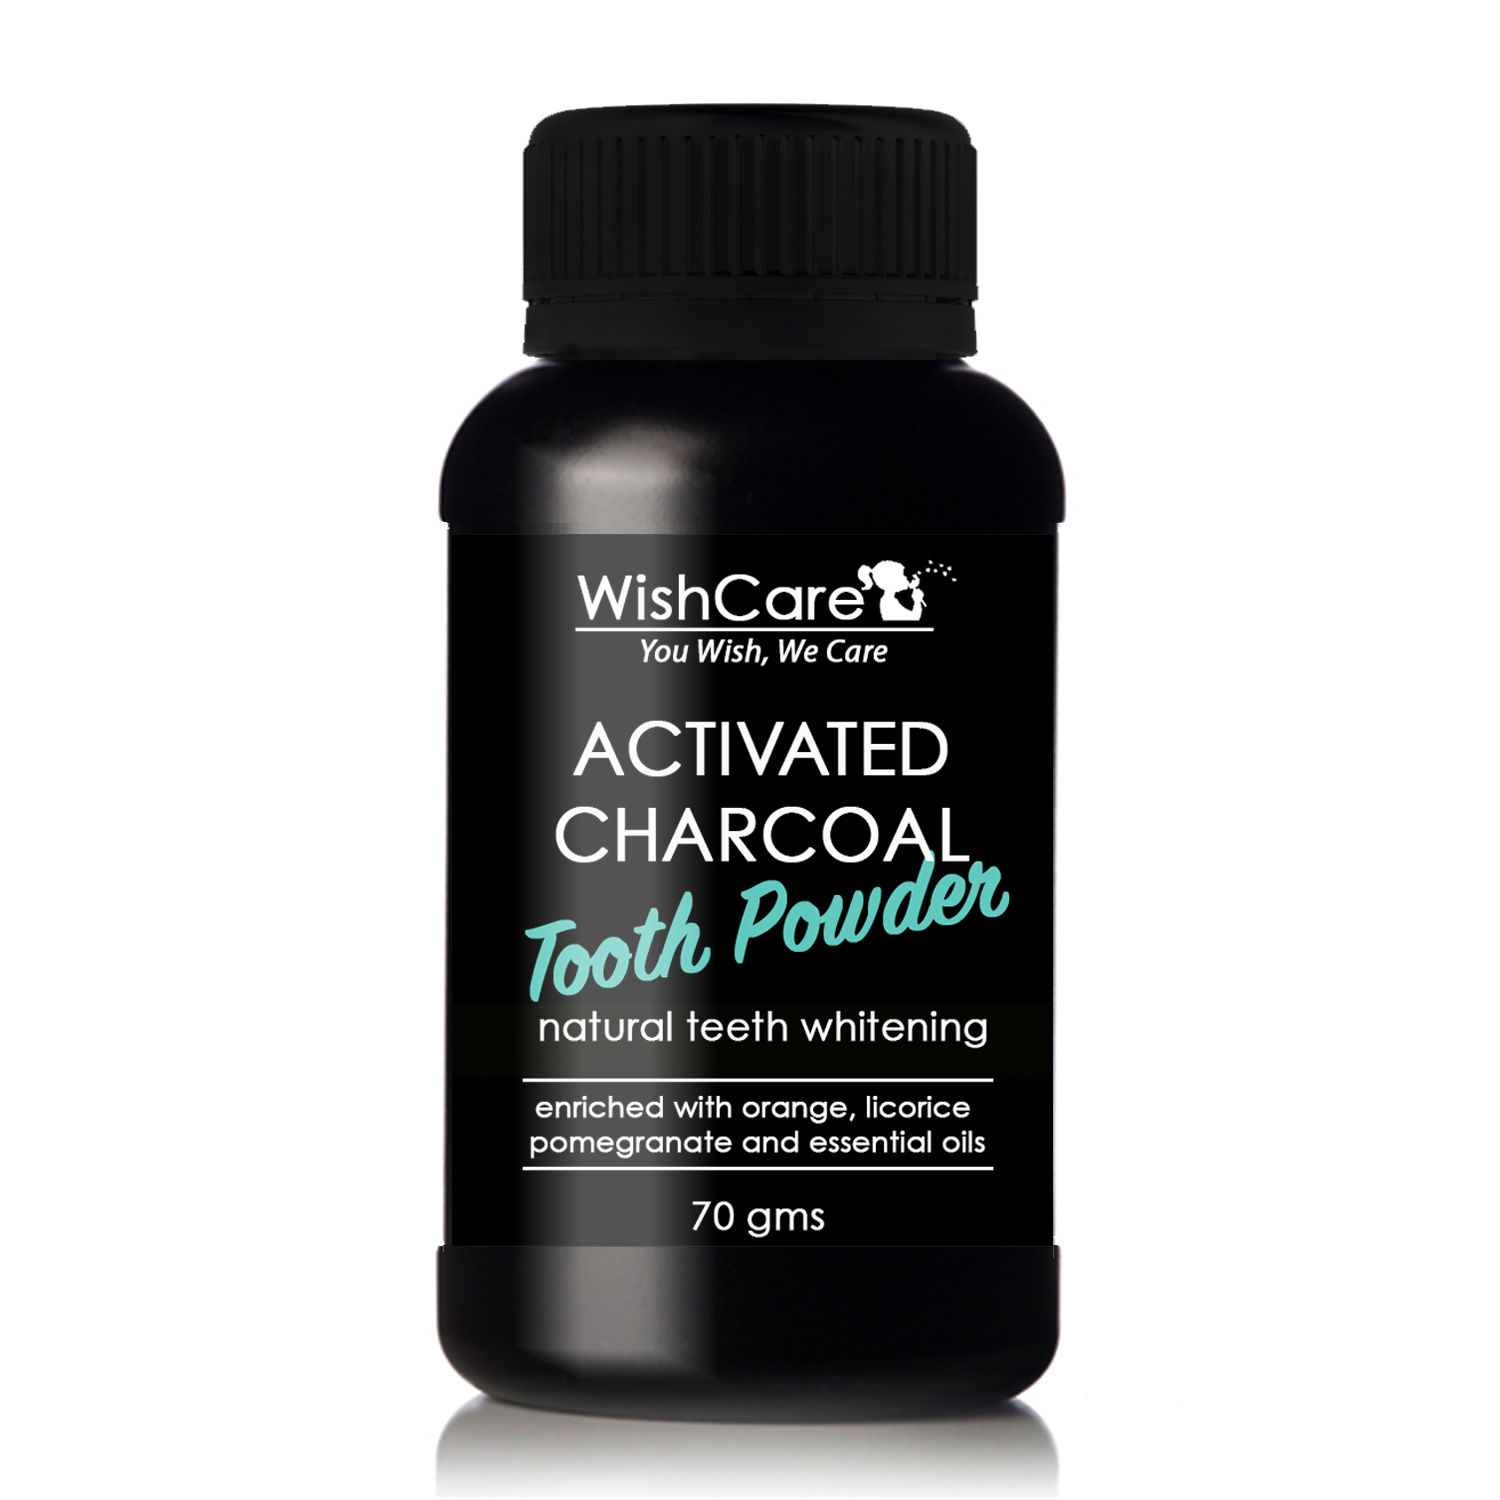 Buy WishCare Activated Charcoal Tooth Powder for Natural Teeth Whitening, Enamel Safe Teeth Whitener, Minty Fresh Feel - 70 Grams - Purplle